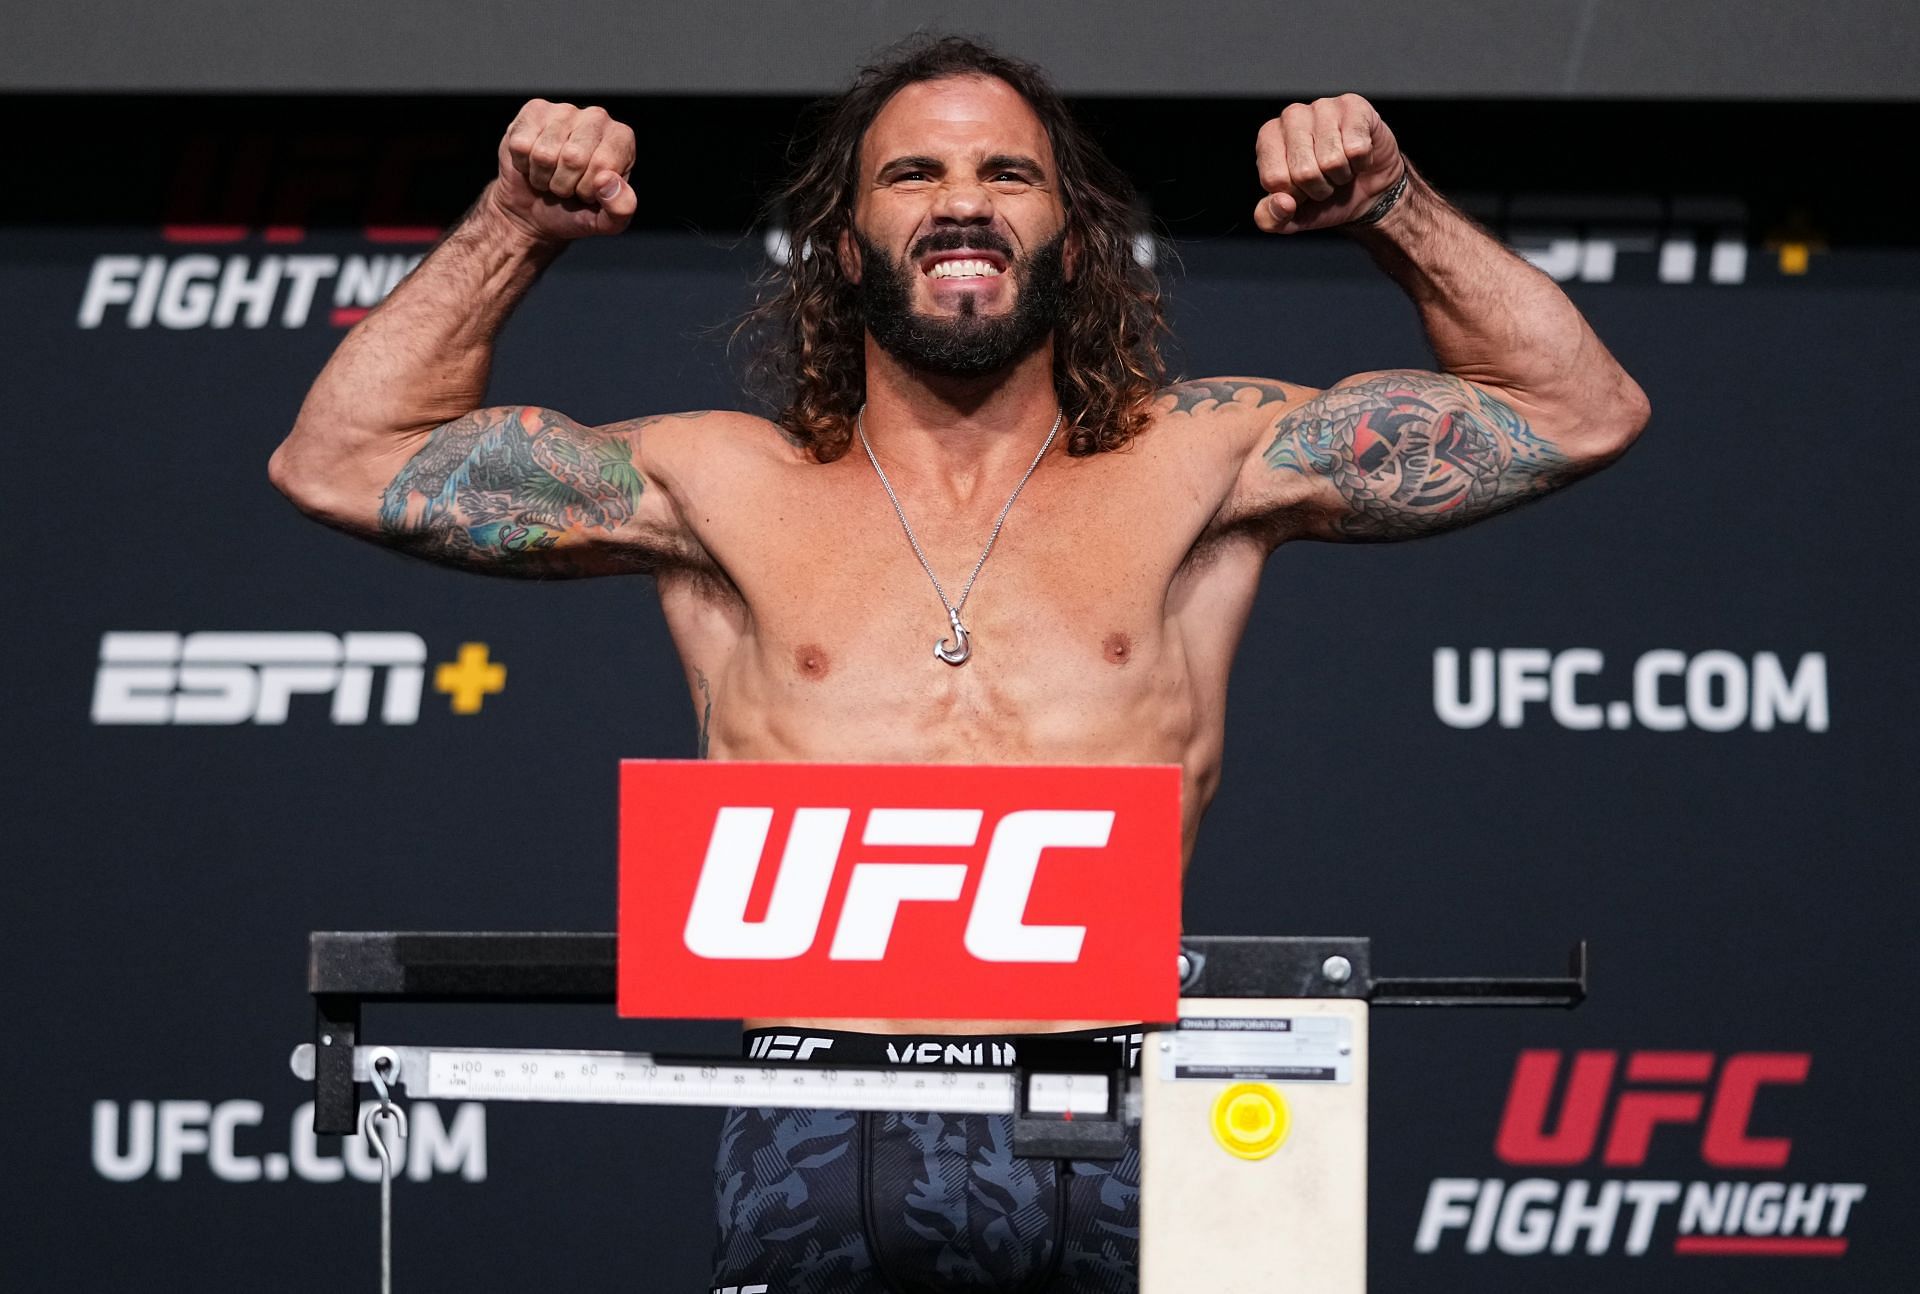 Clay Guida holds a record of 37-21